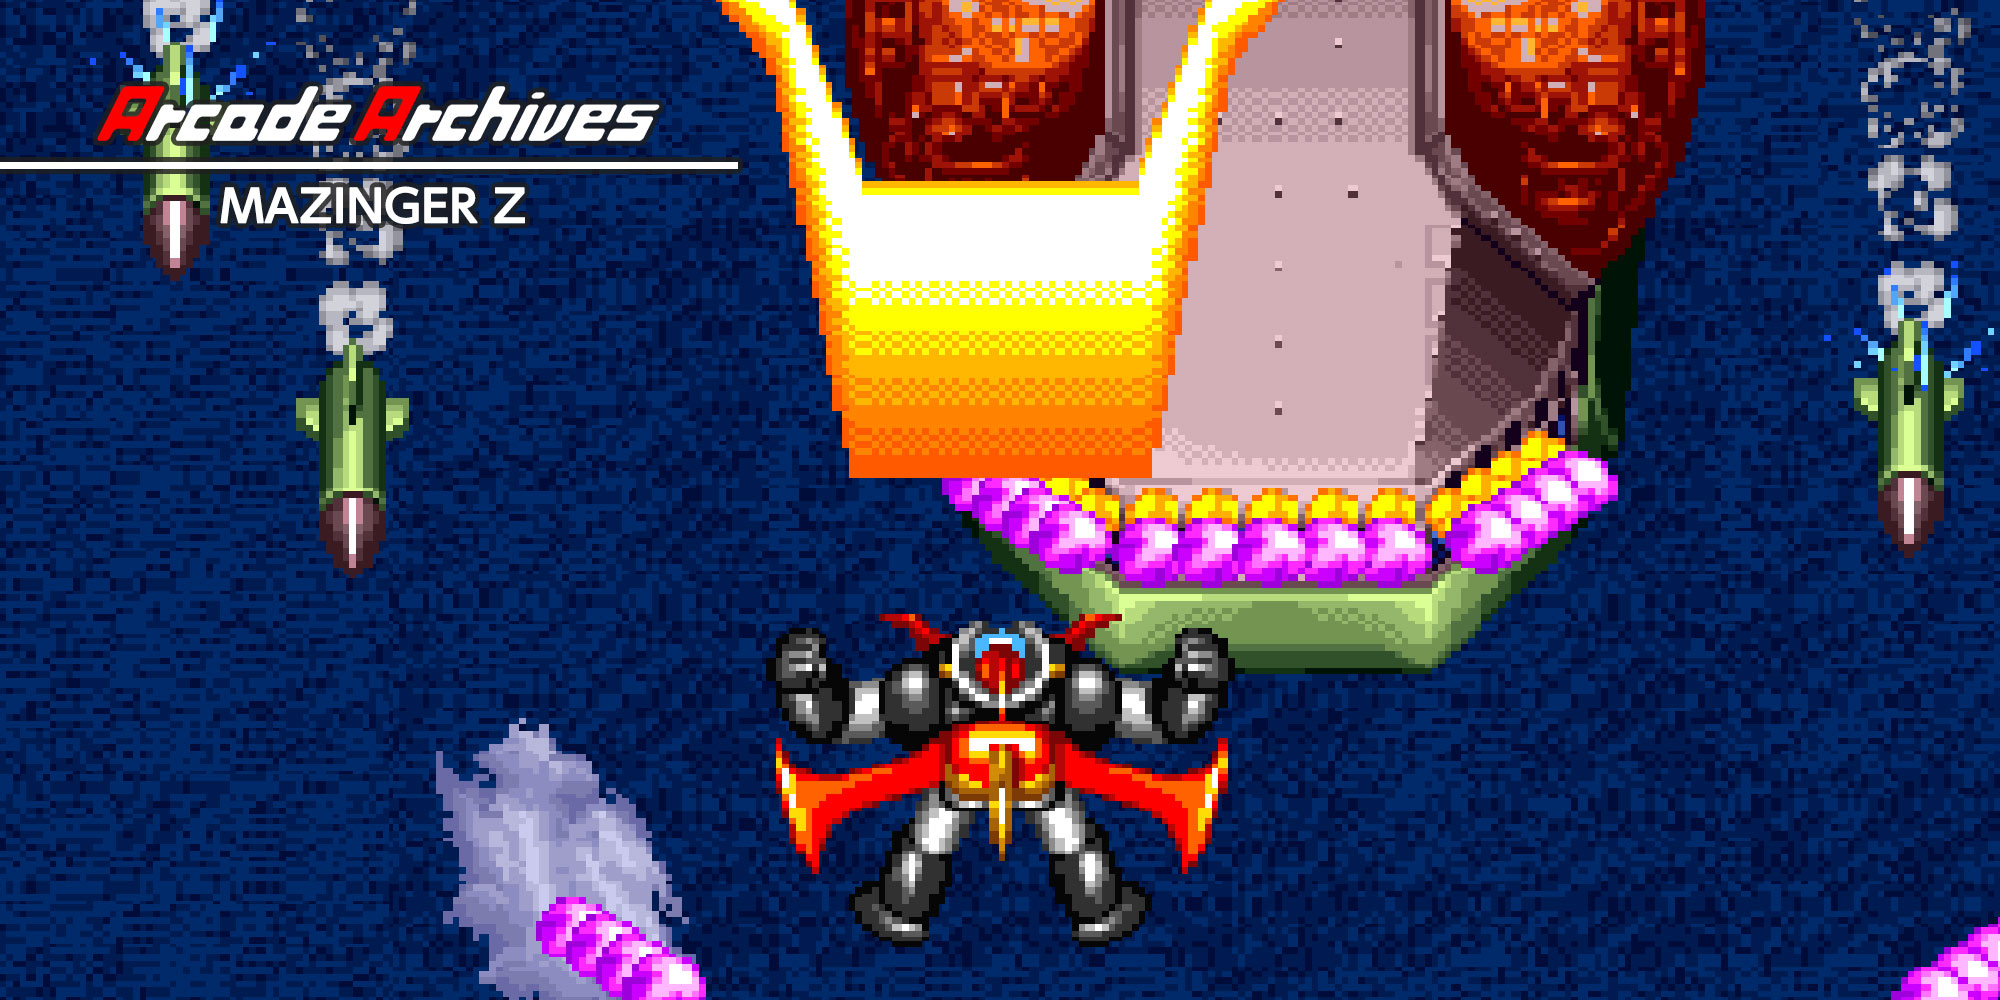 Arcade Archives MAZINGER Z | Nintendo Switch download software 